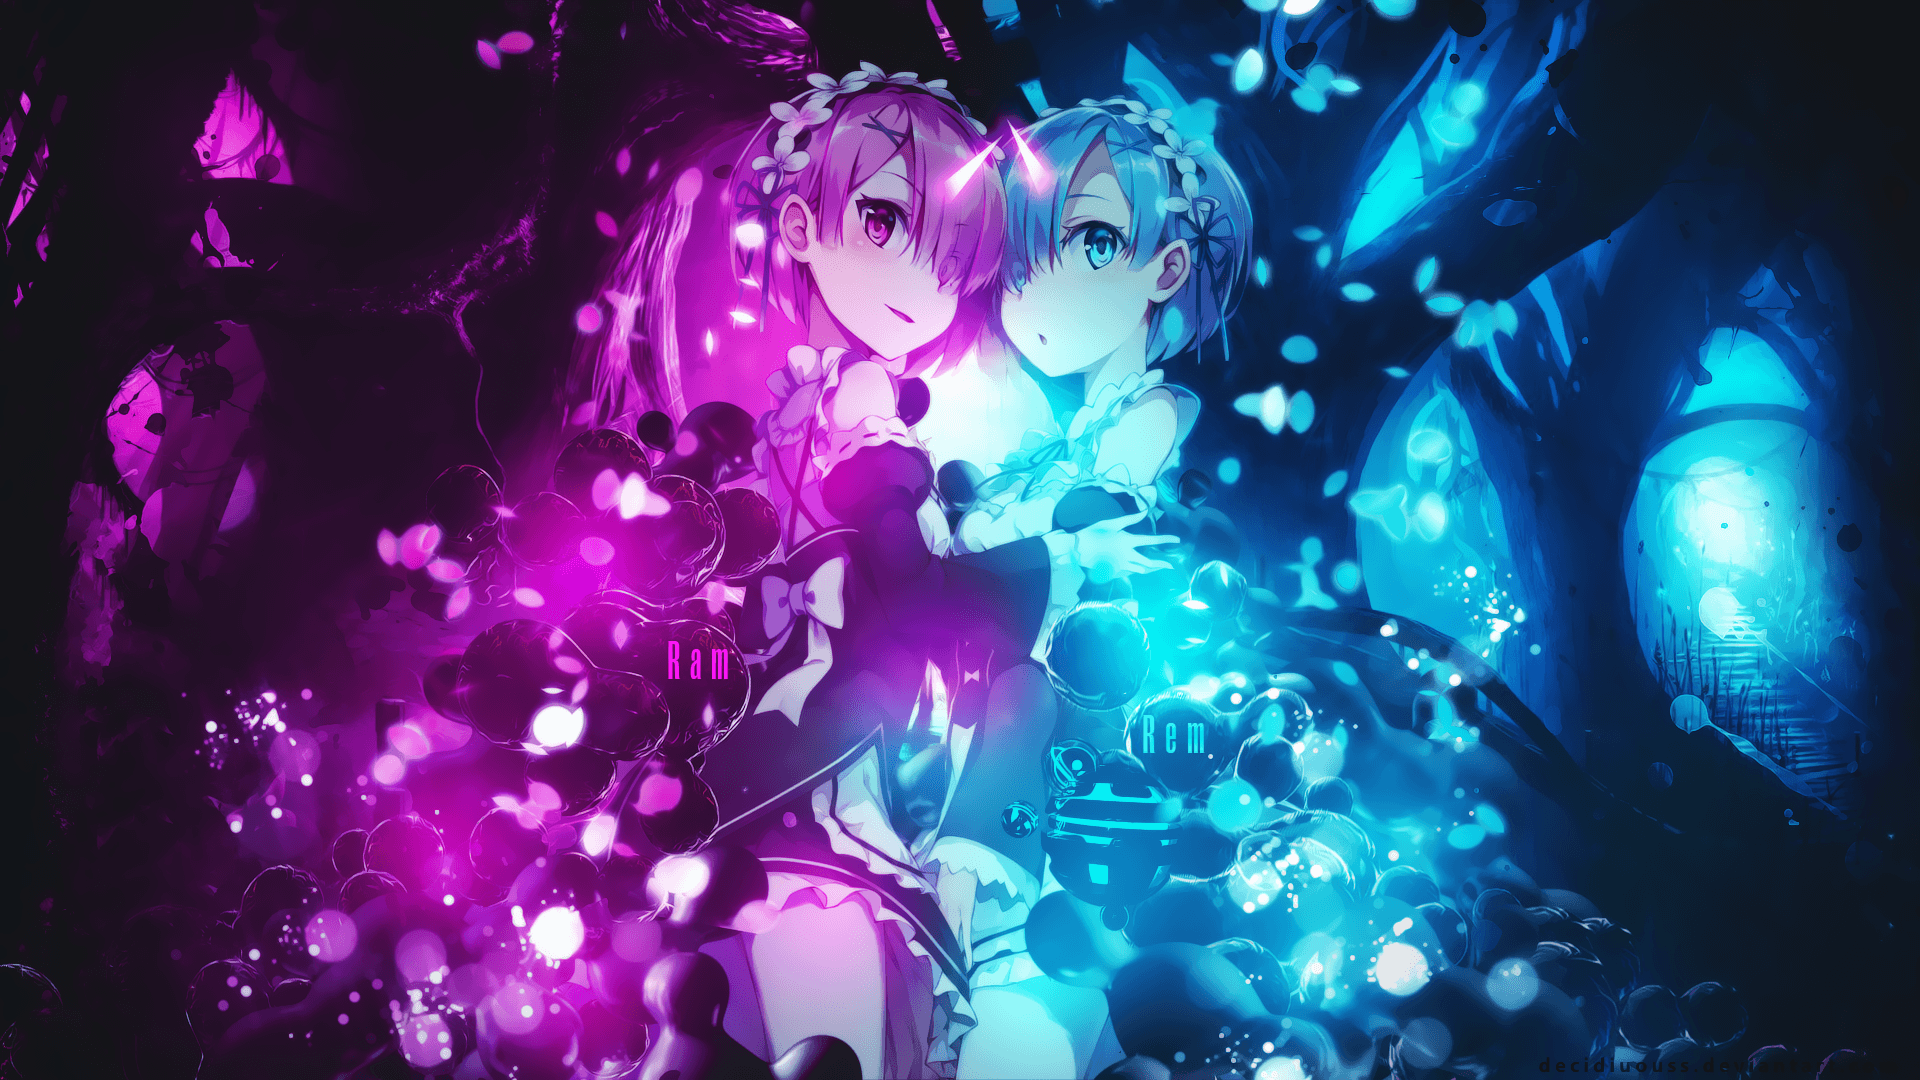 Cute Blue And Purple Wallpapers